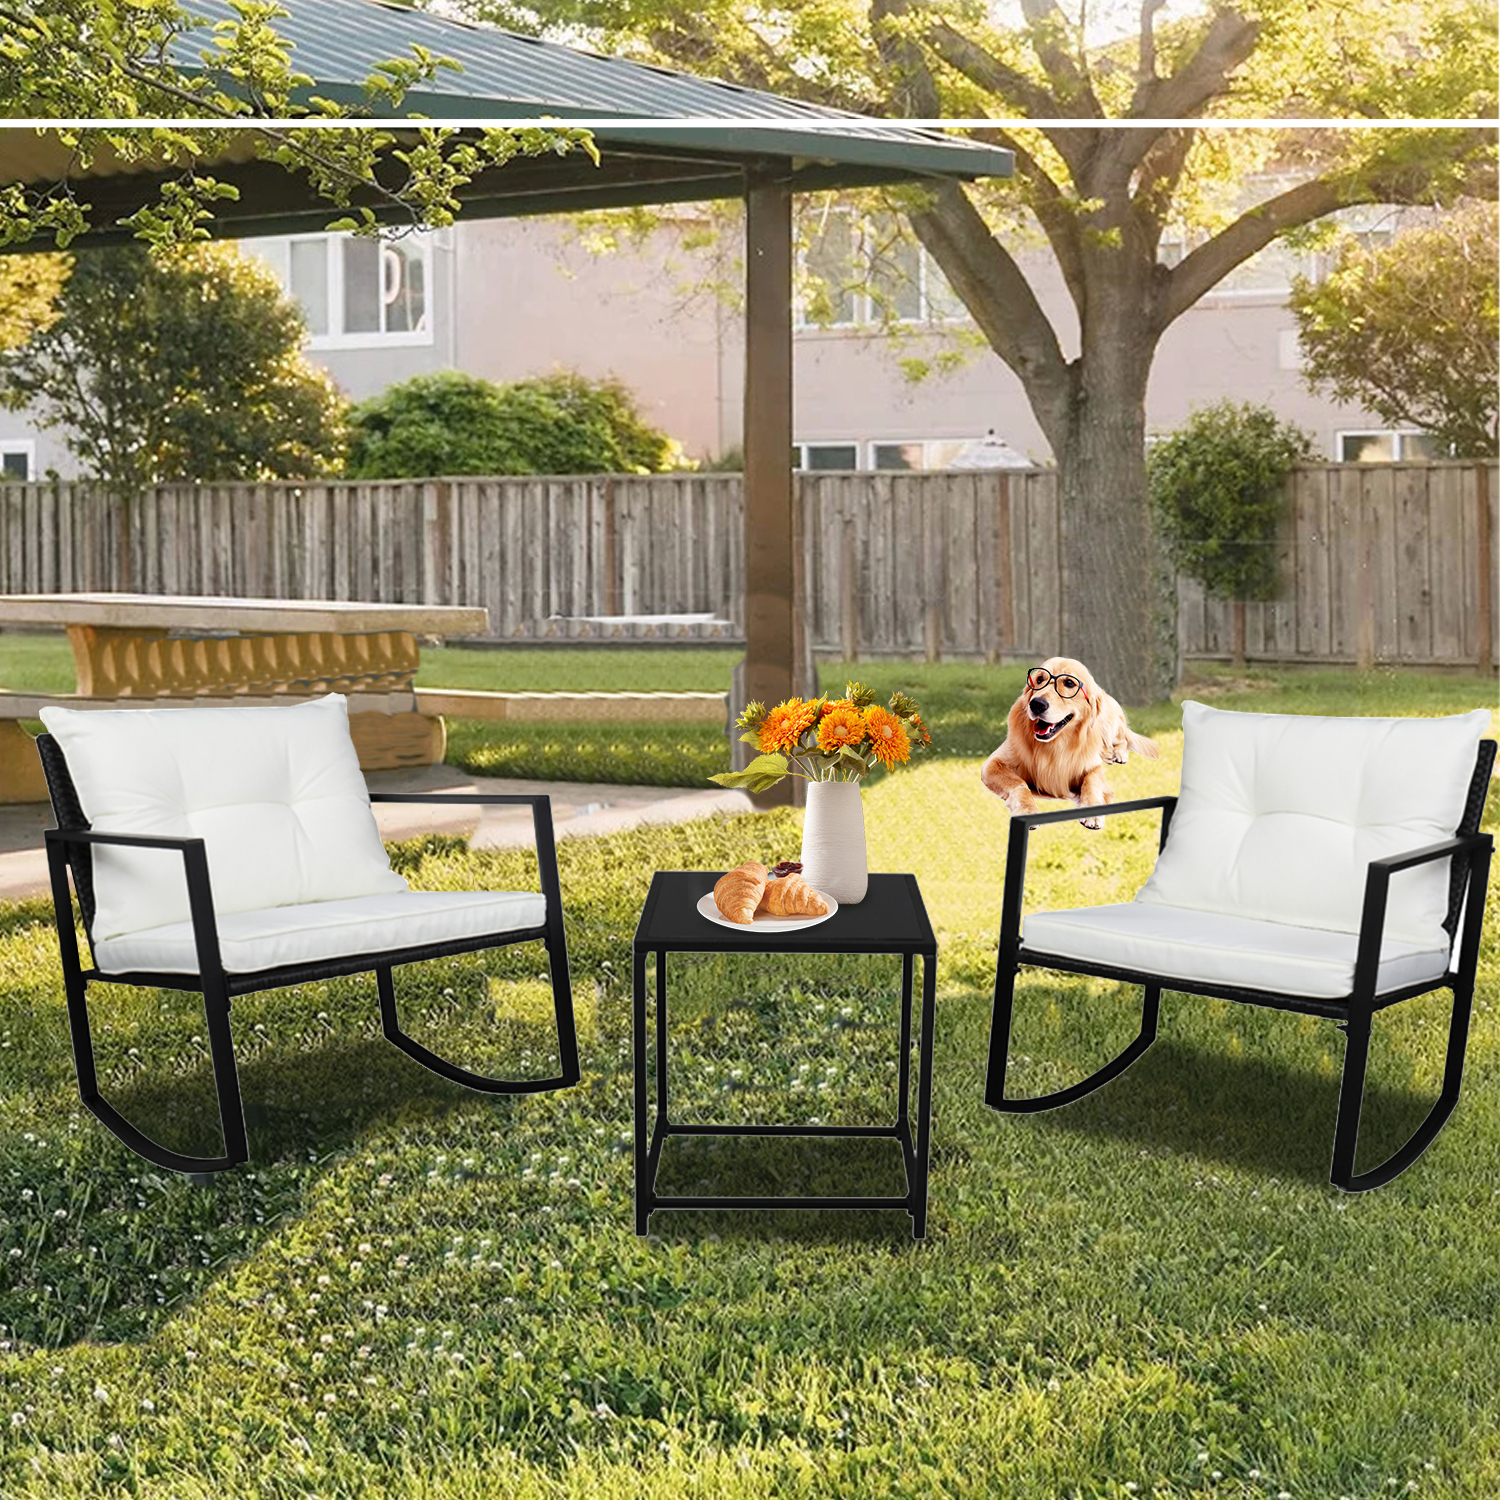 Outdoor Rocking Chair Sets Patio Furniture, 3 Piece Wicker Bistro Set with White Cushion Rocking Chairs and Coffee Table, Patio Rocking Chair Set for Backyard Garden, All-Weather Rocking Chair, W10671 - image 2 of 9